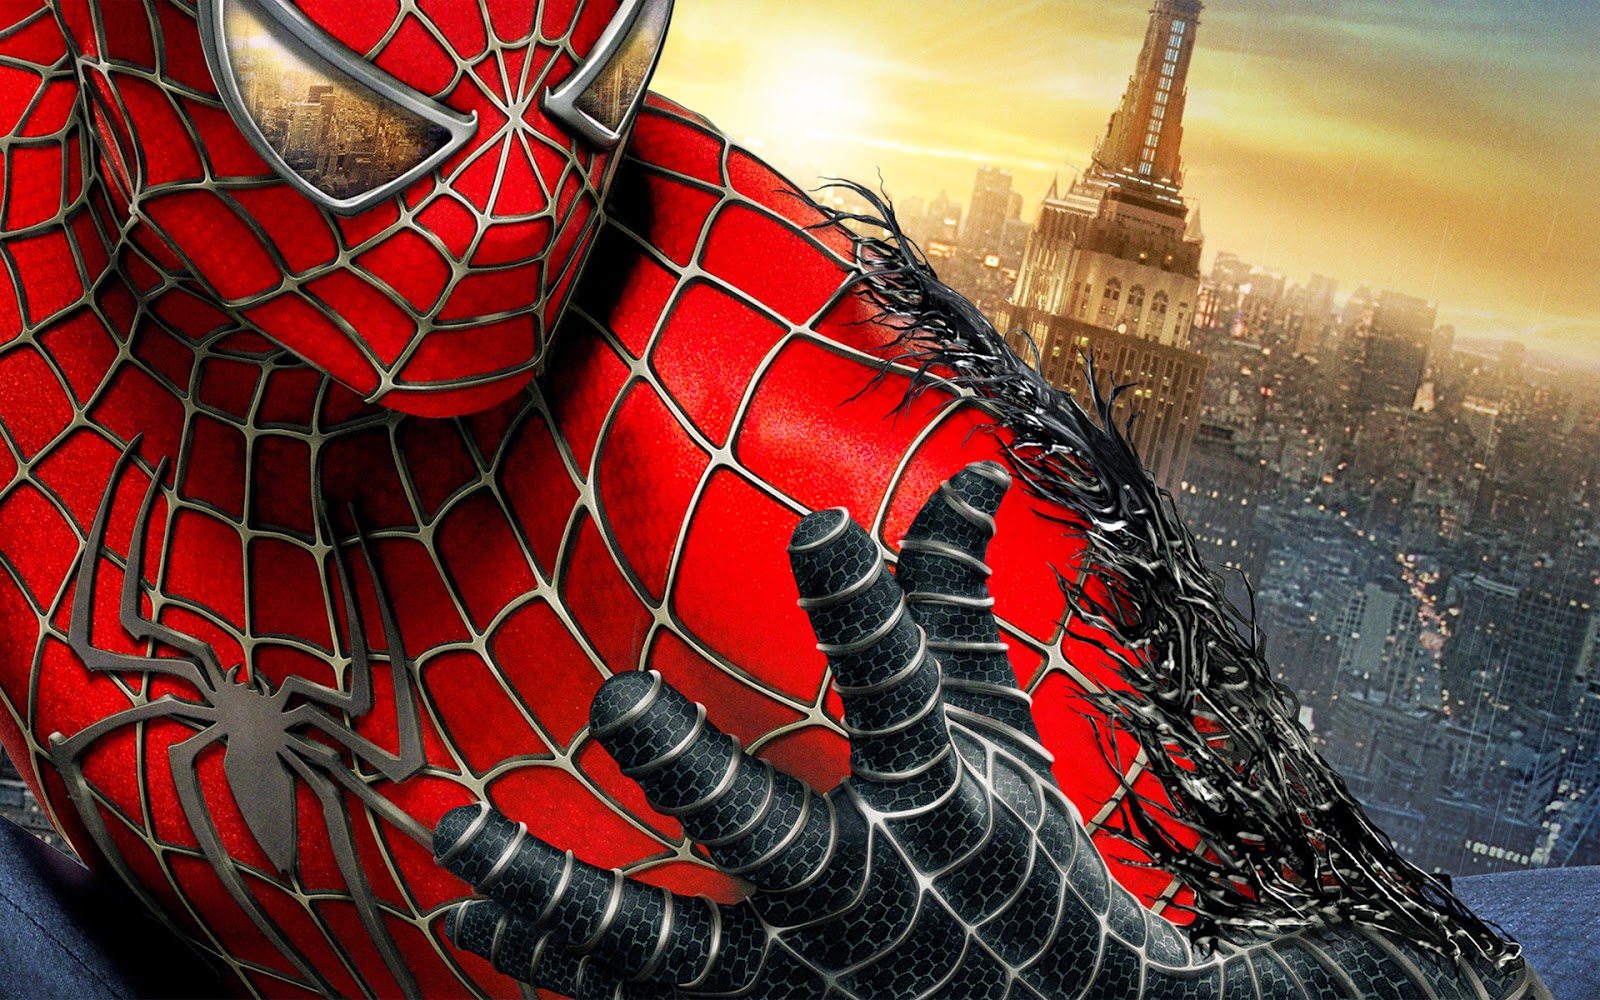 SpiderMan 5 Will Relased Soon in the Year 2015